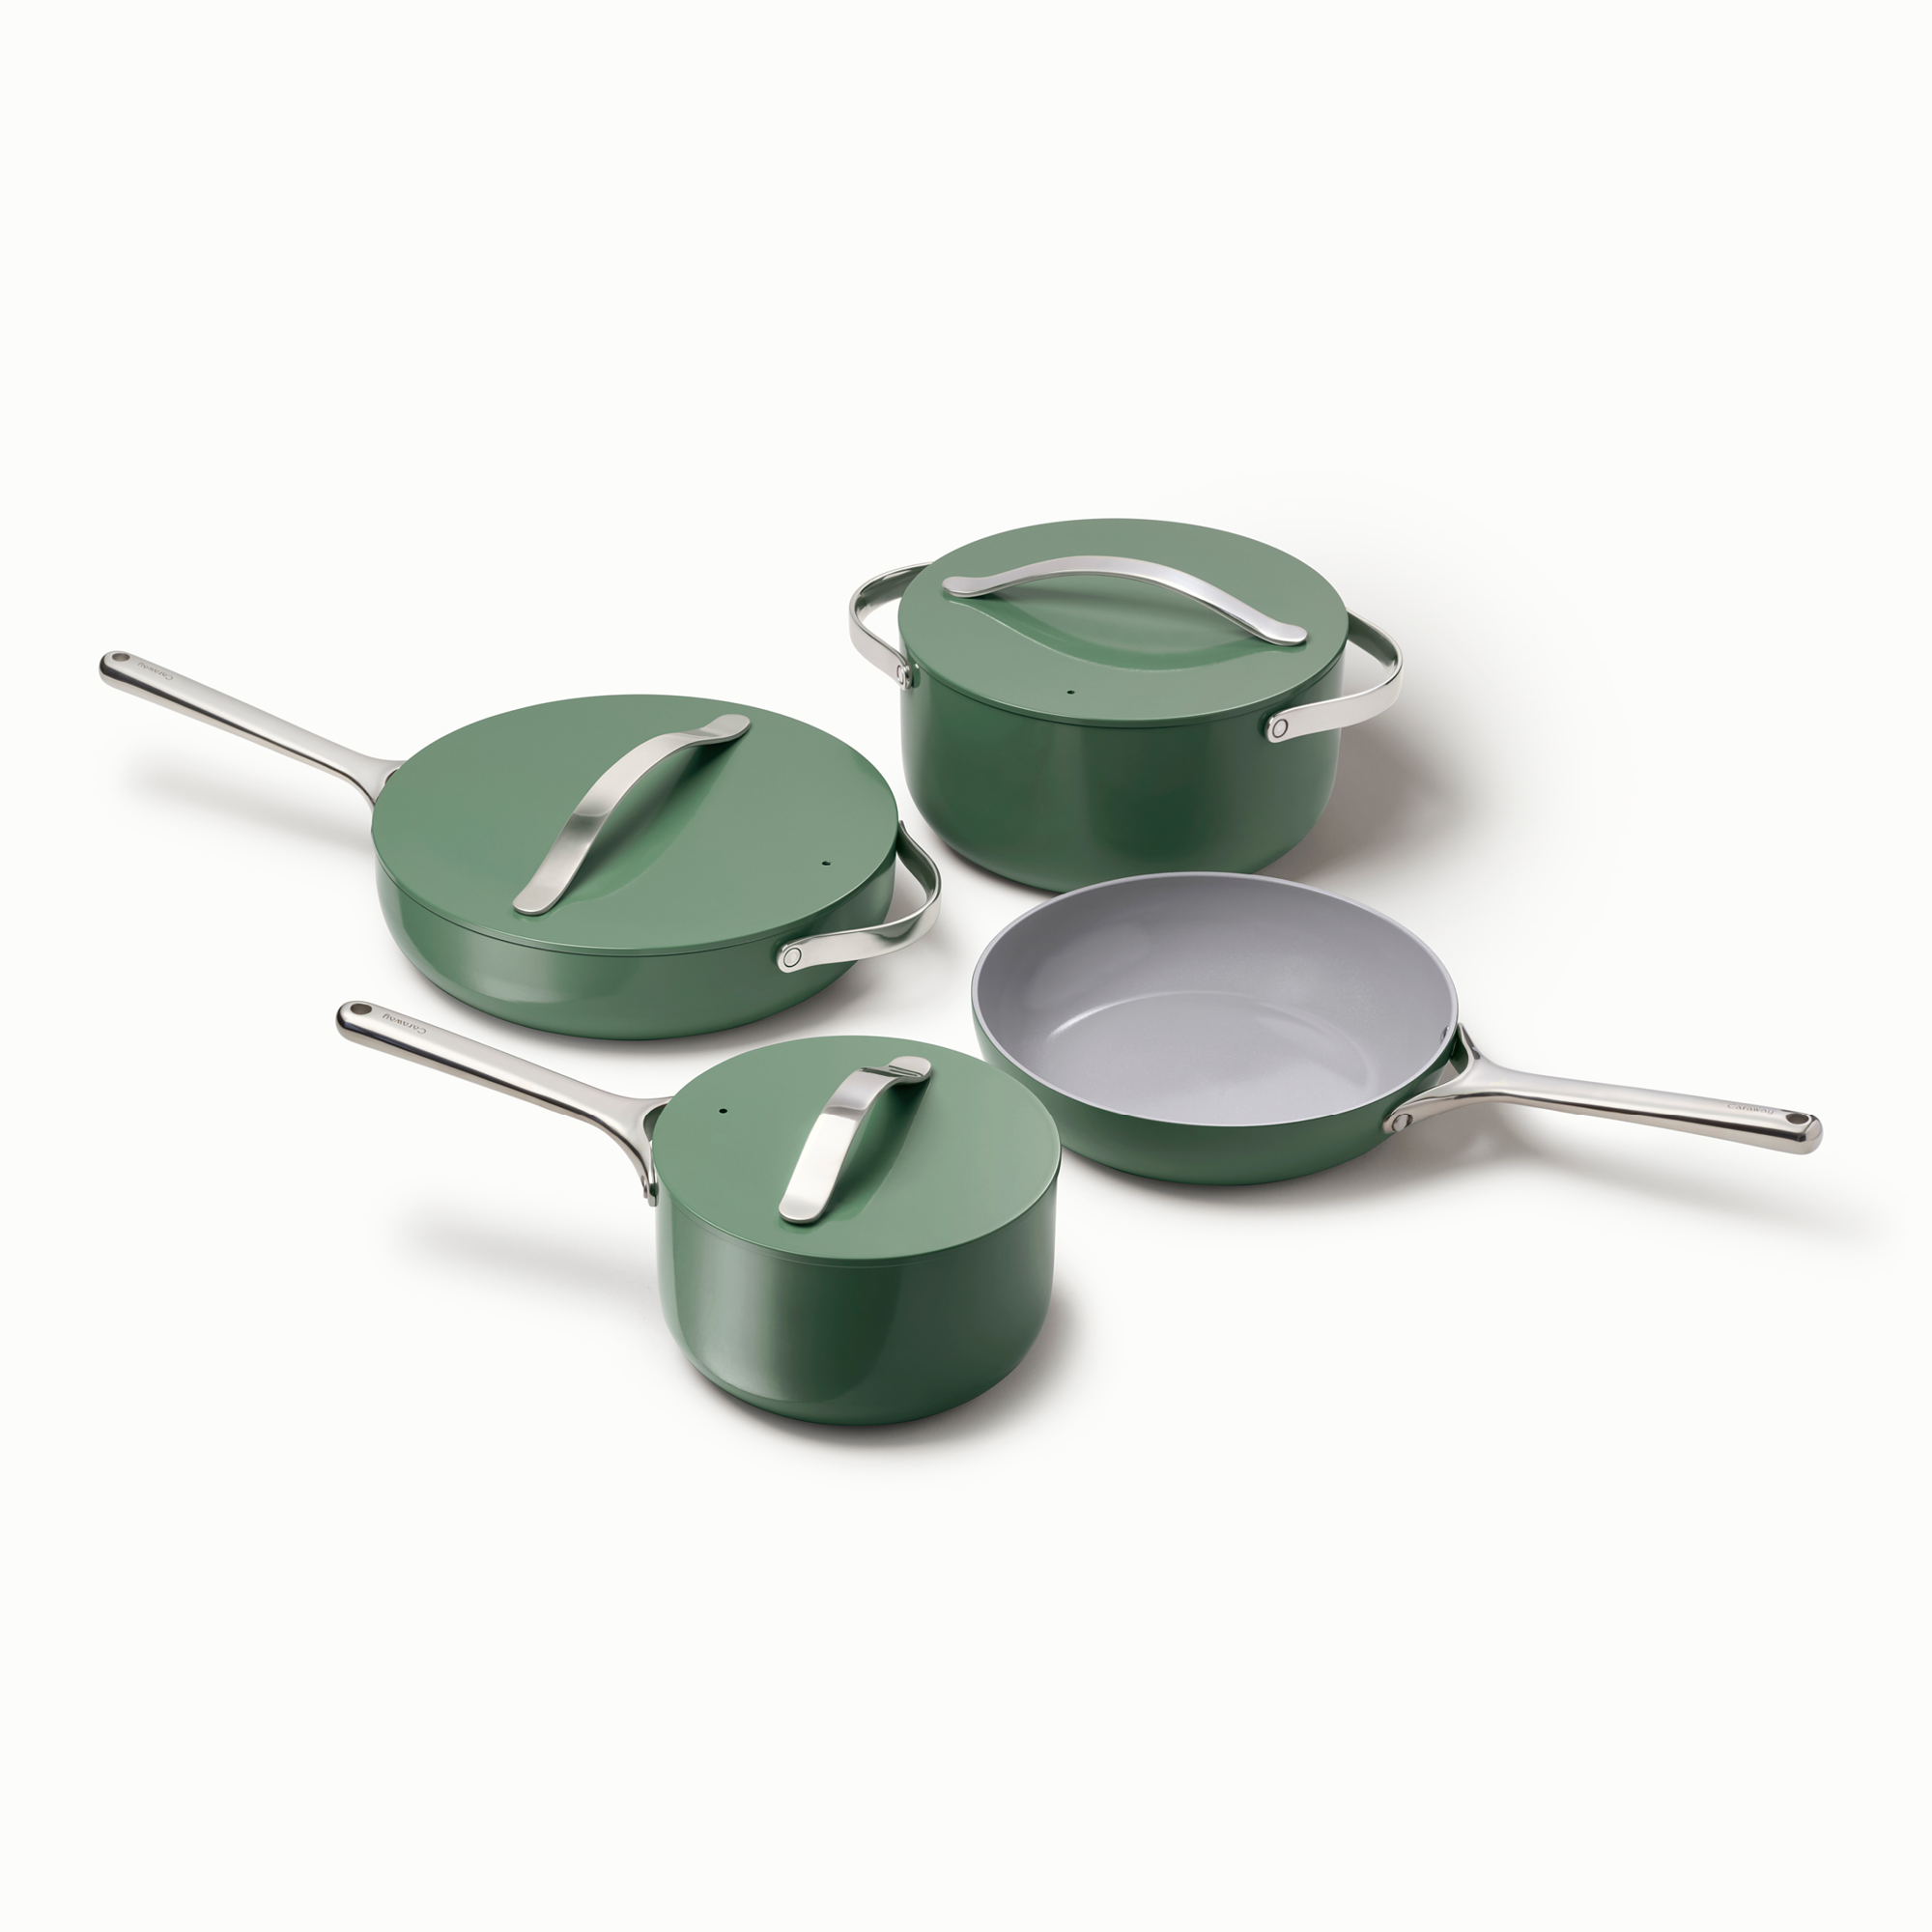 Caraway's Non-Toxic Cookware Launched in Three Limited-Edition Colors